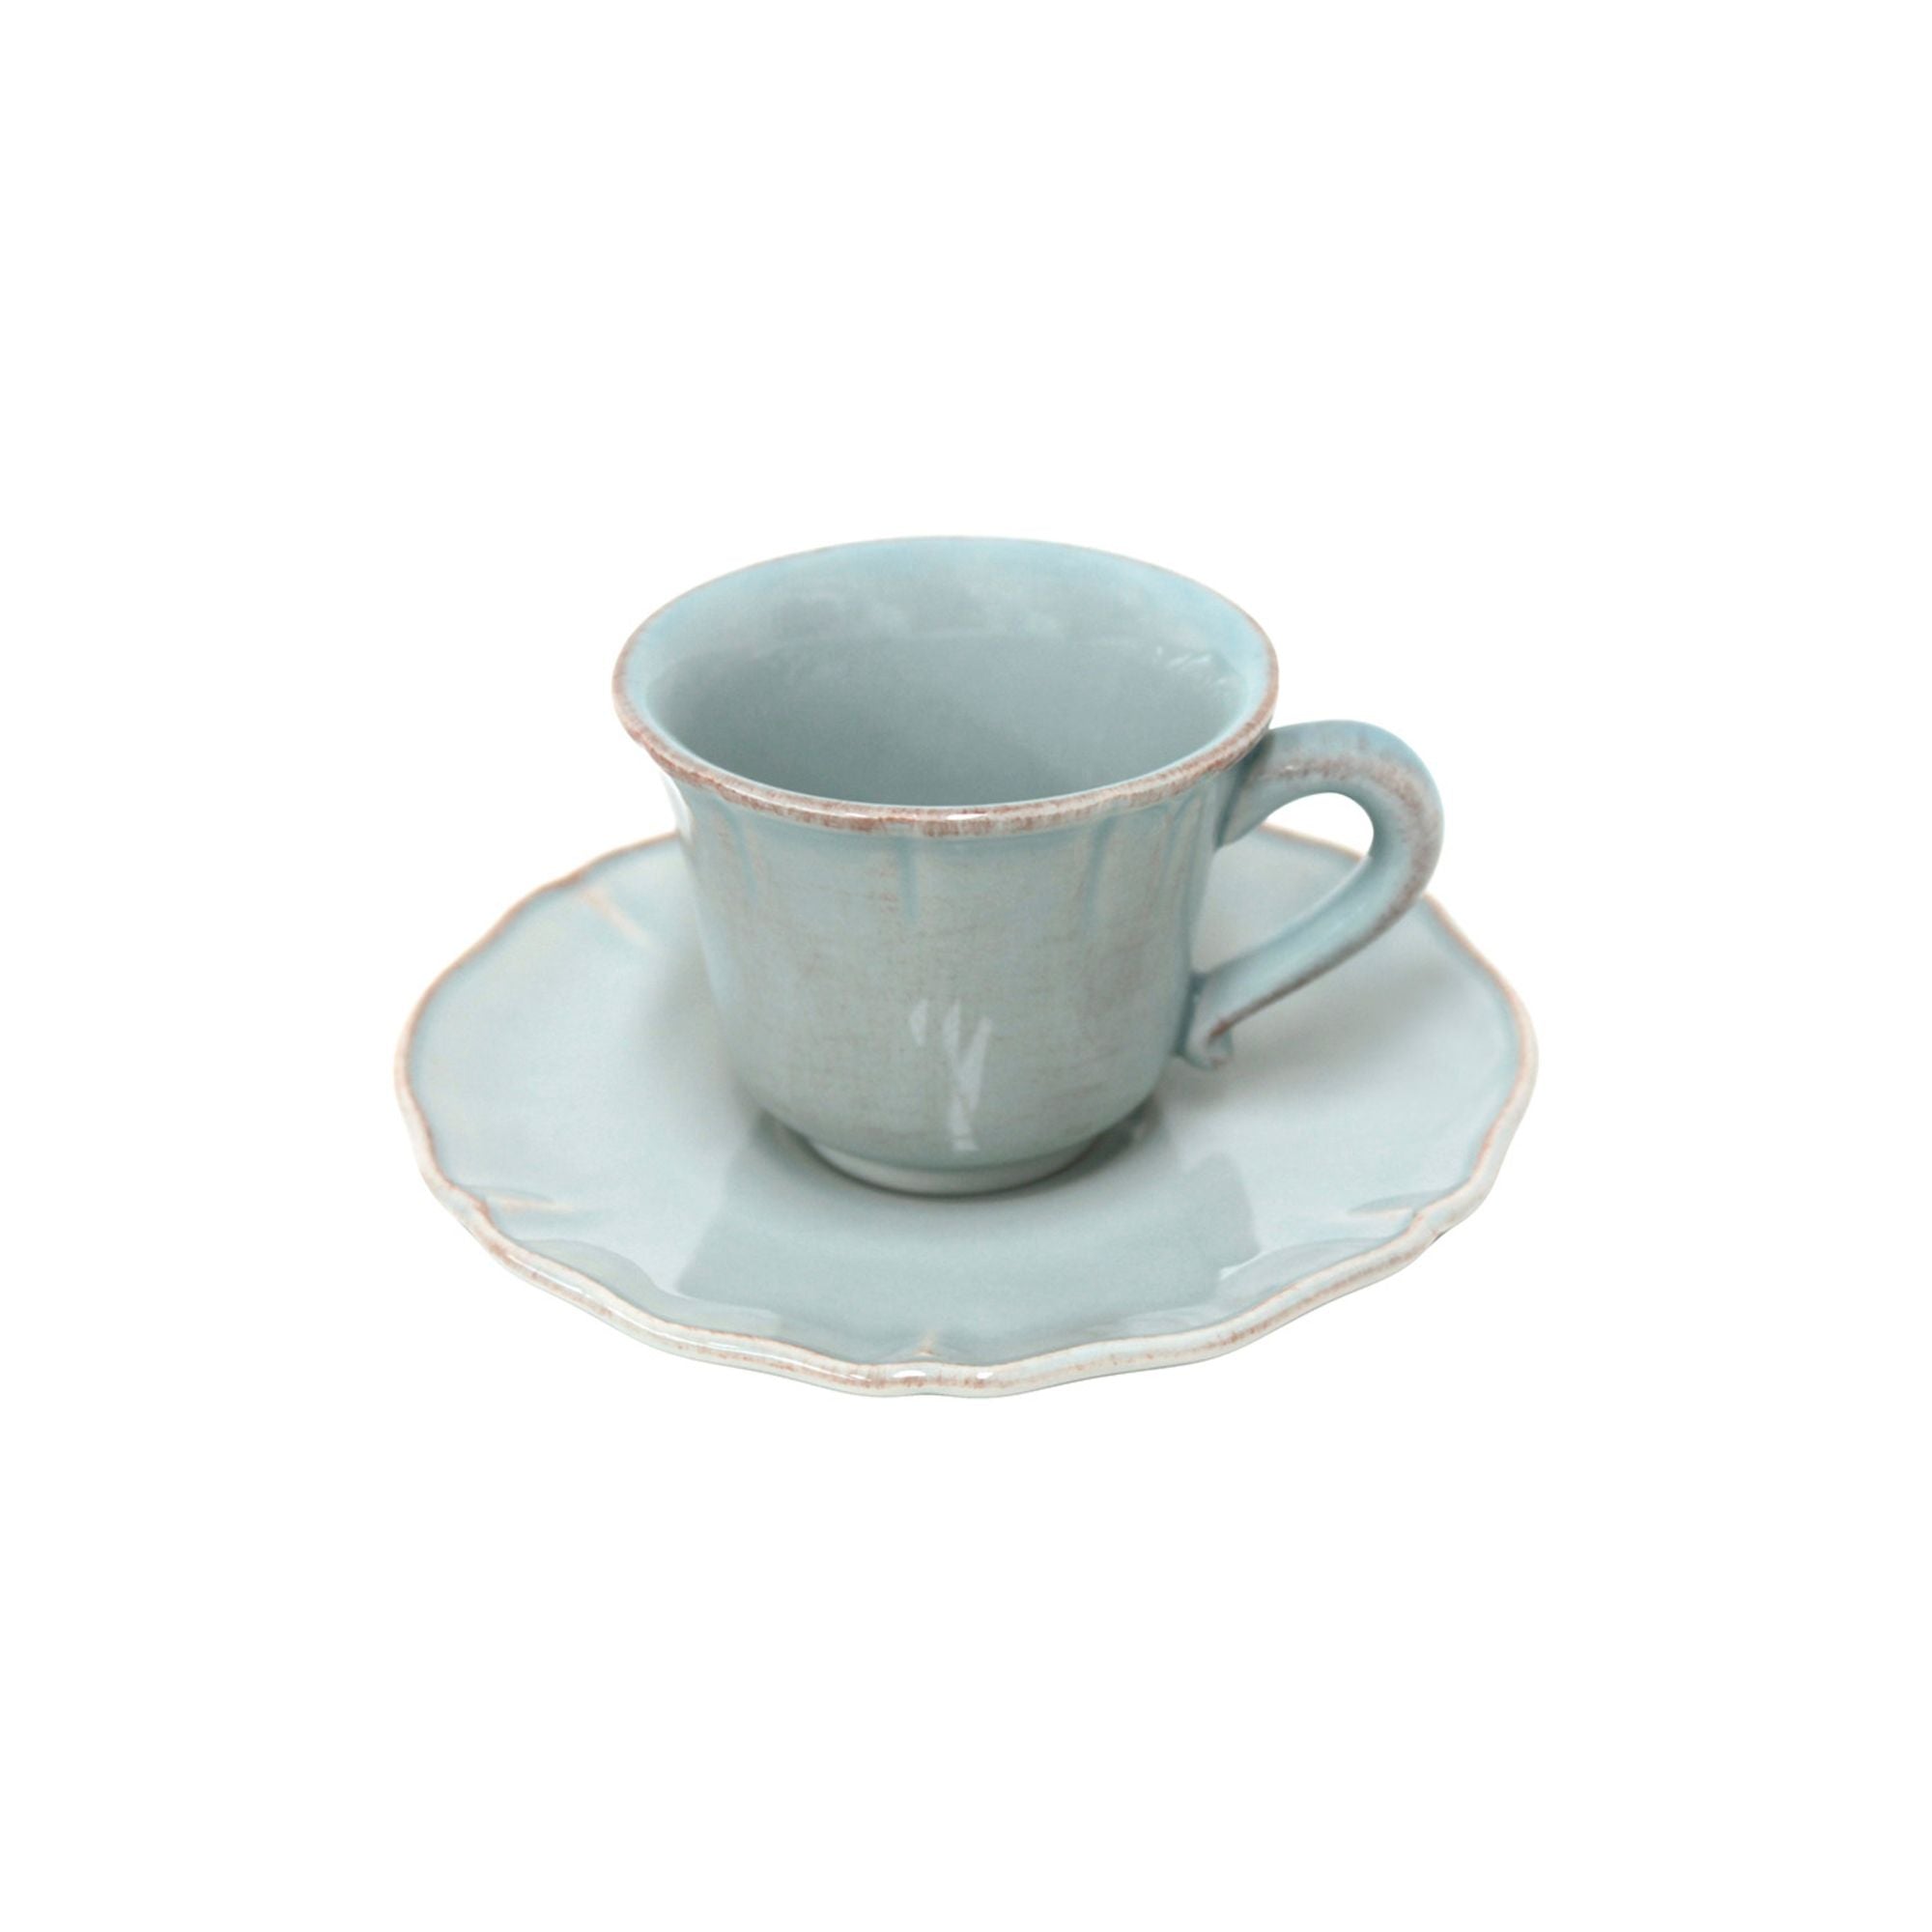 Alentejo Coffee Cup and Saucer 3 oz. Turquoise